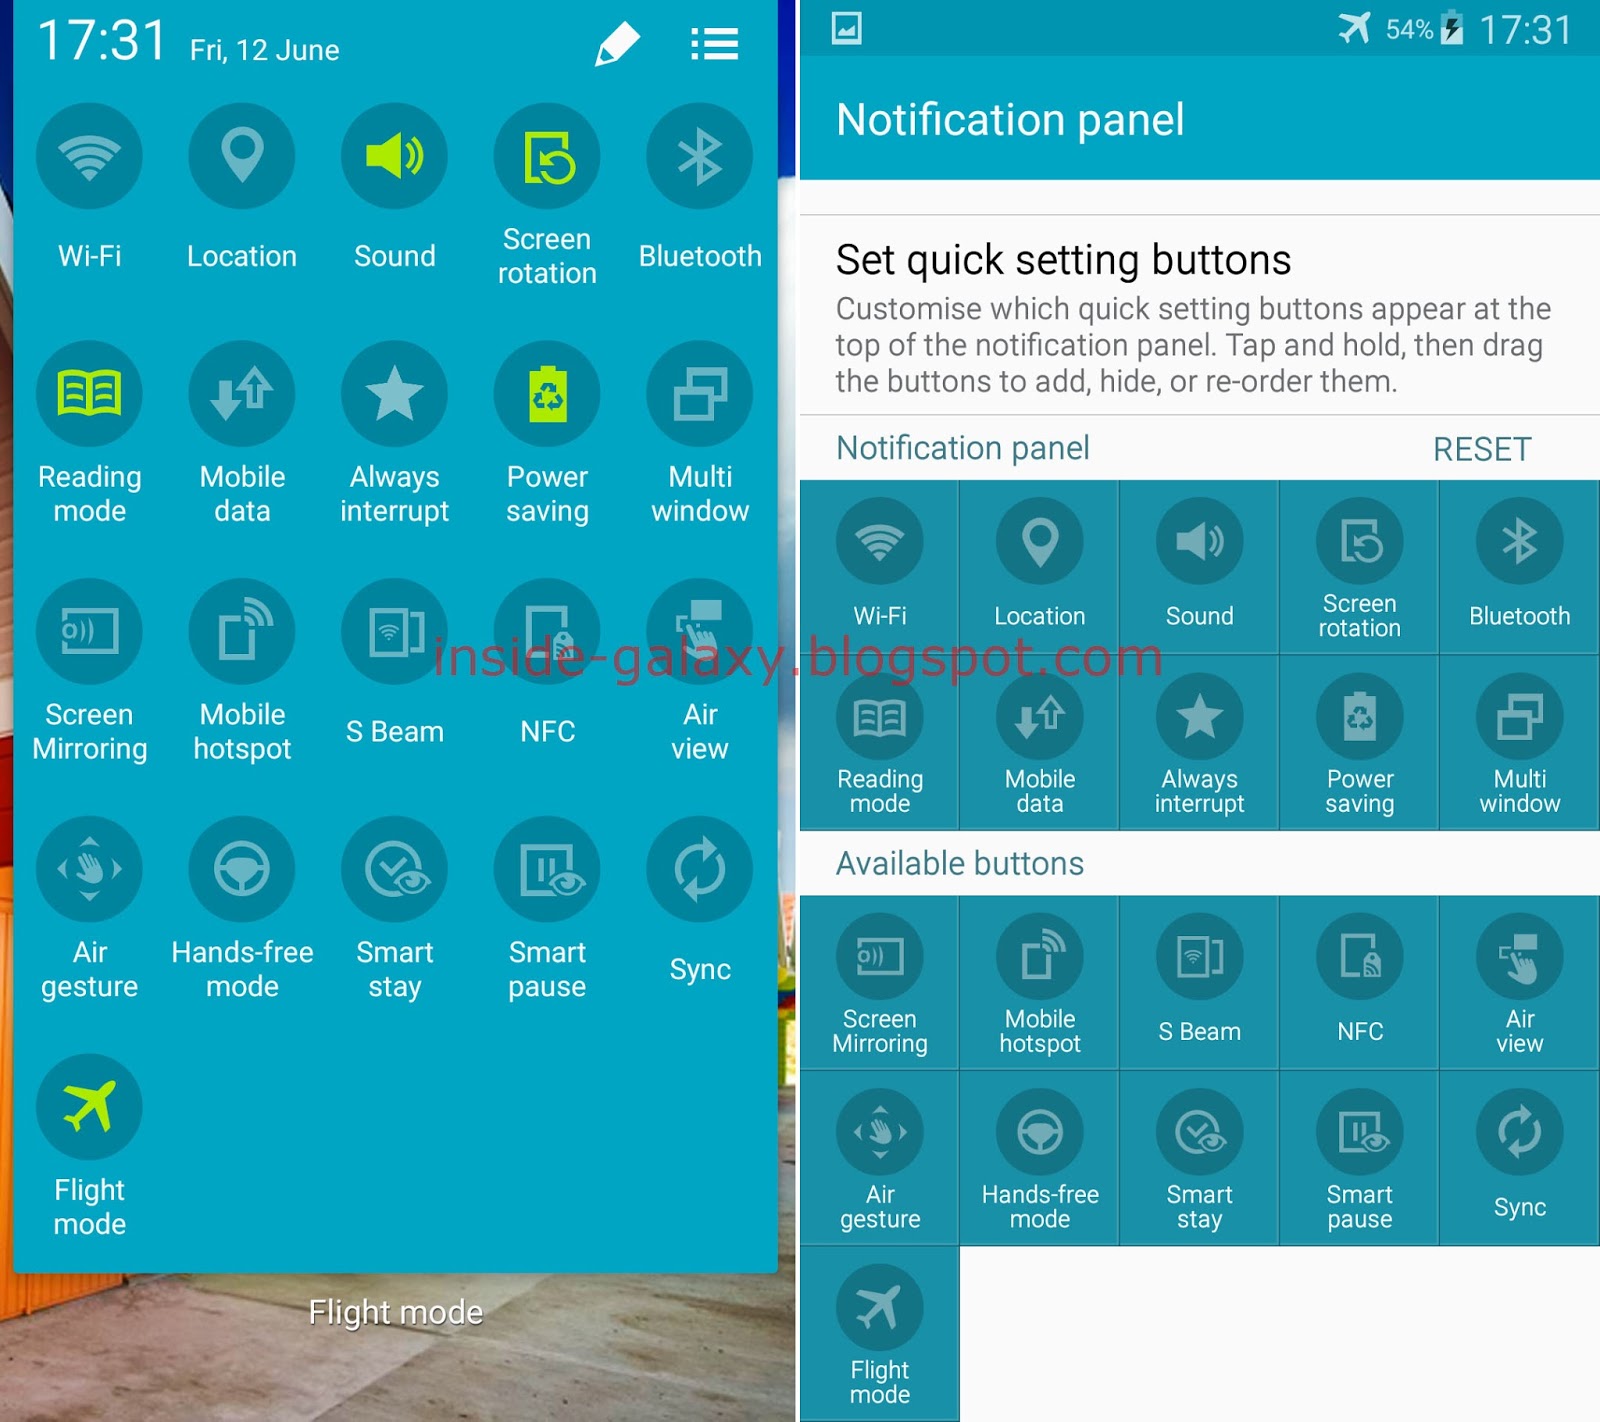 Inside Galaxy: Samsung Galaxy S4: How to Use Quick Settings Panel in